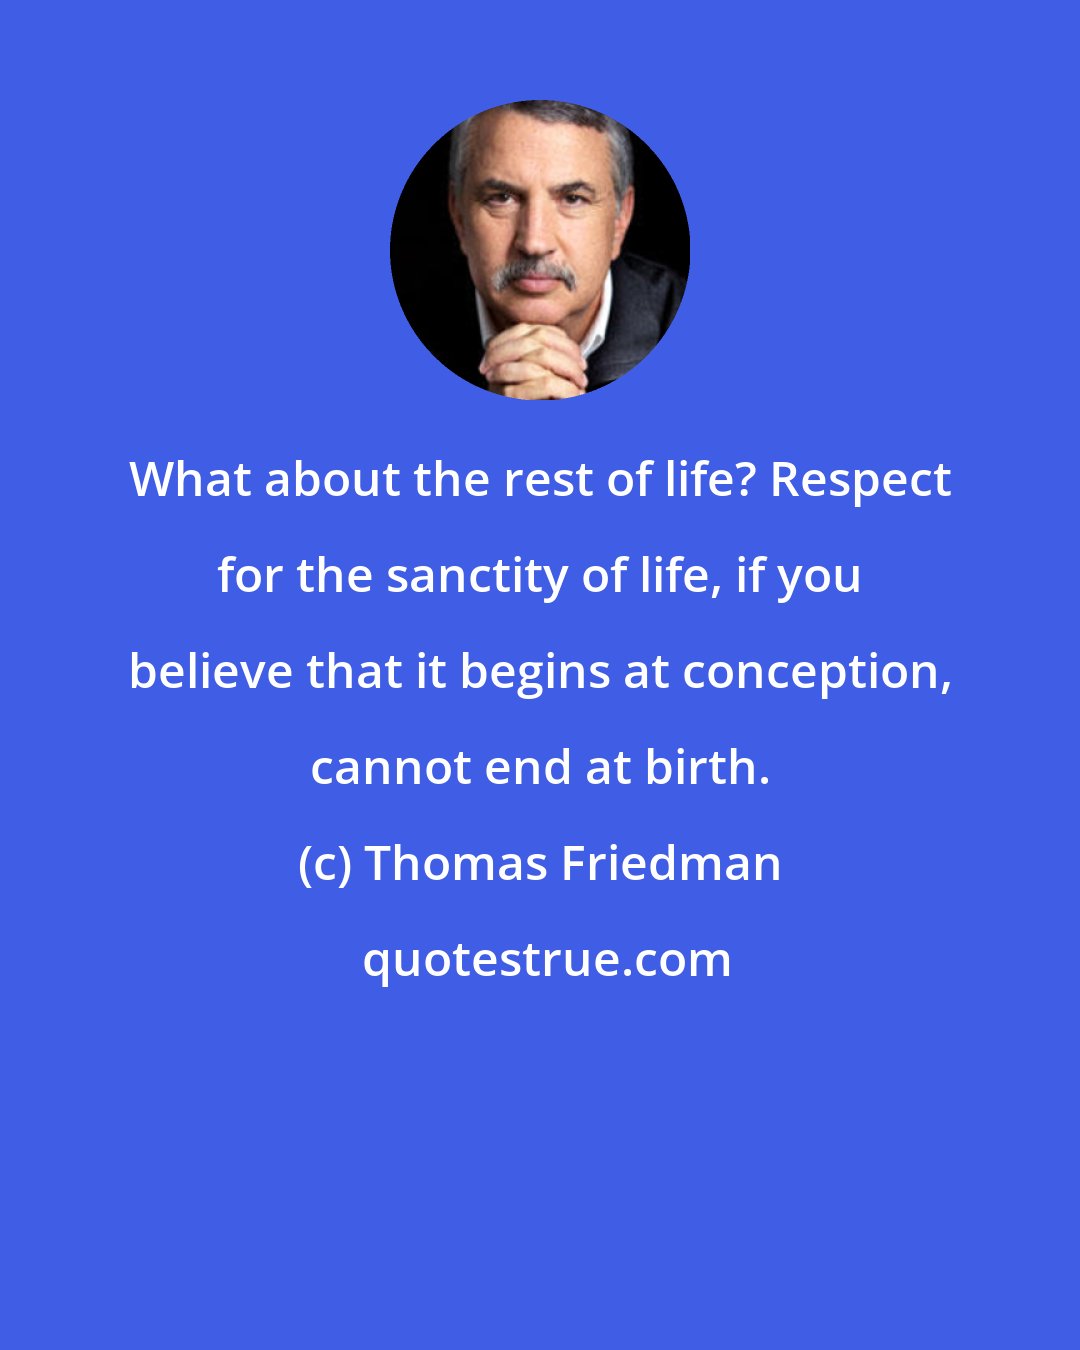 Thomas Friedman: What about the rest of life? Respect for the sanctity of life, if you believe that it begins at conception, cannot end at birth.